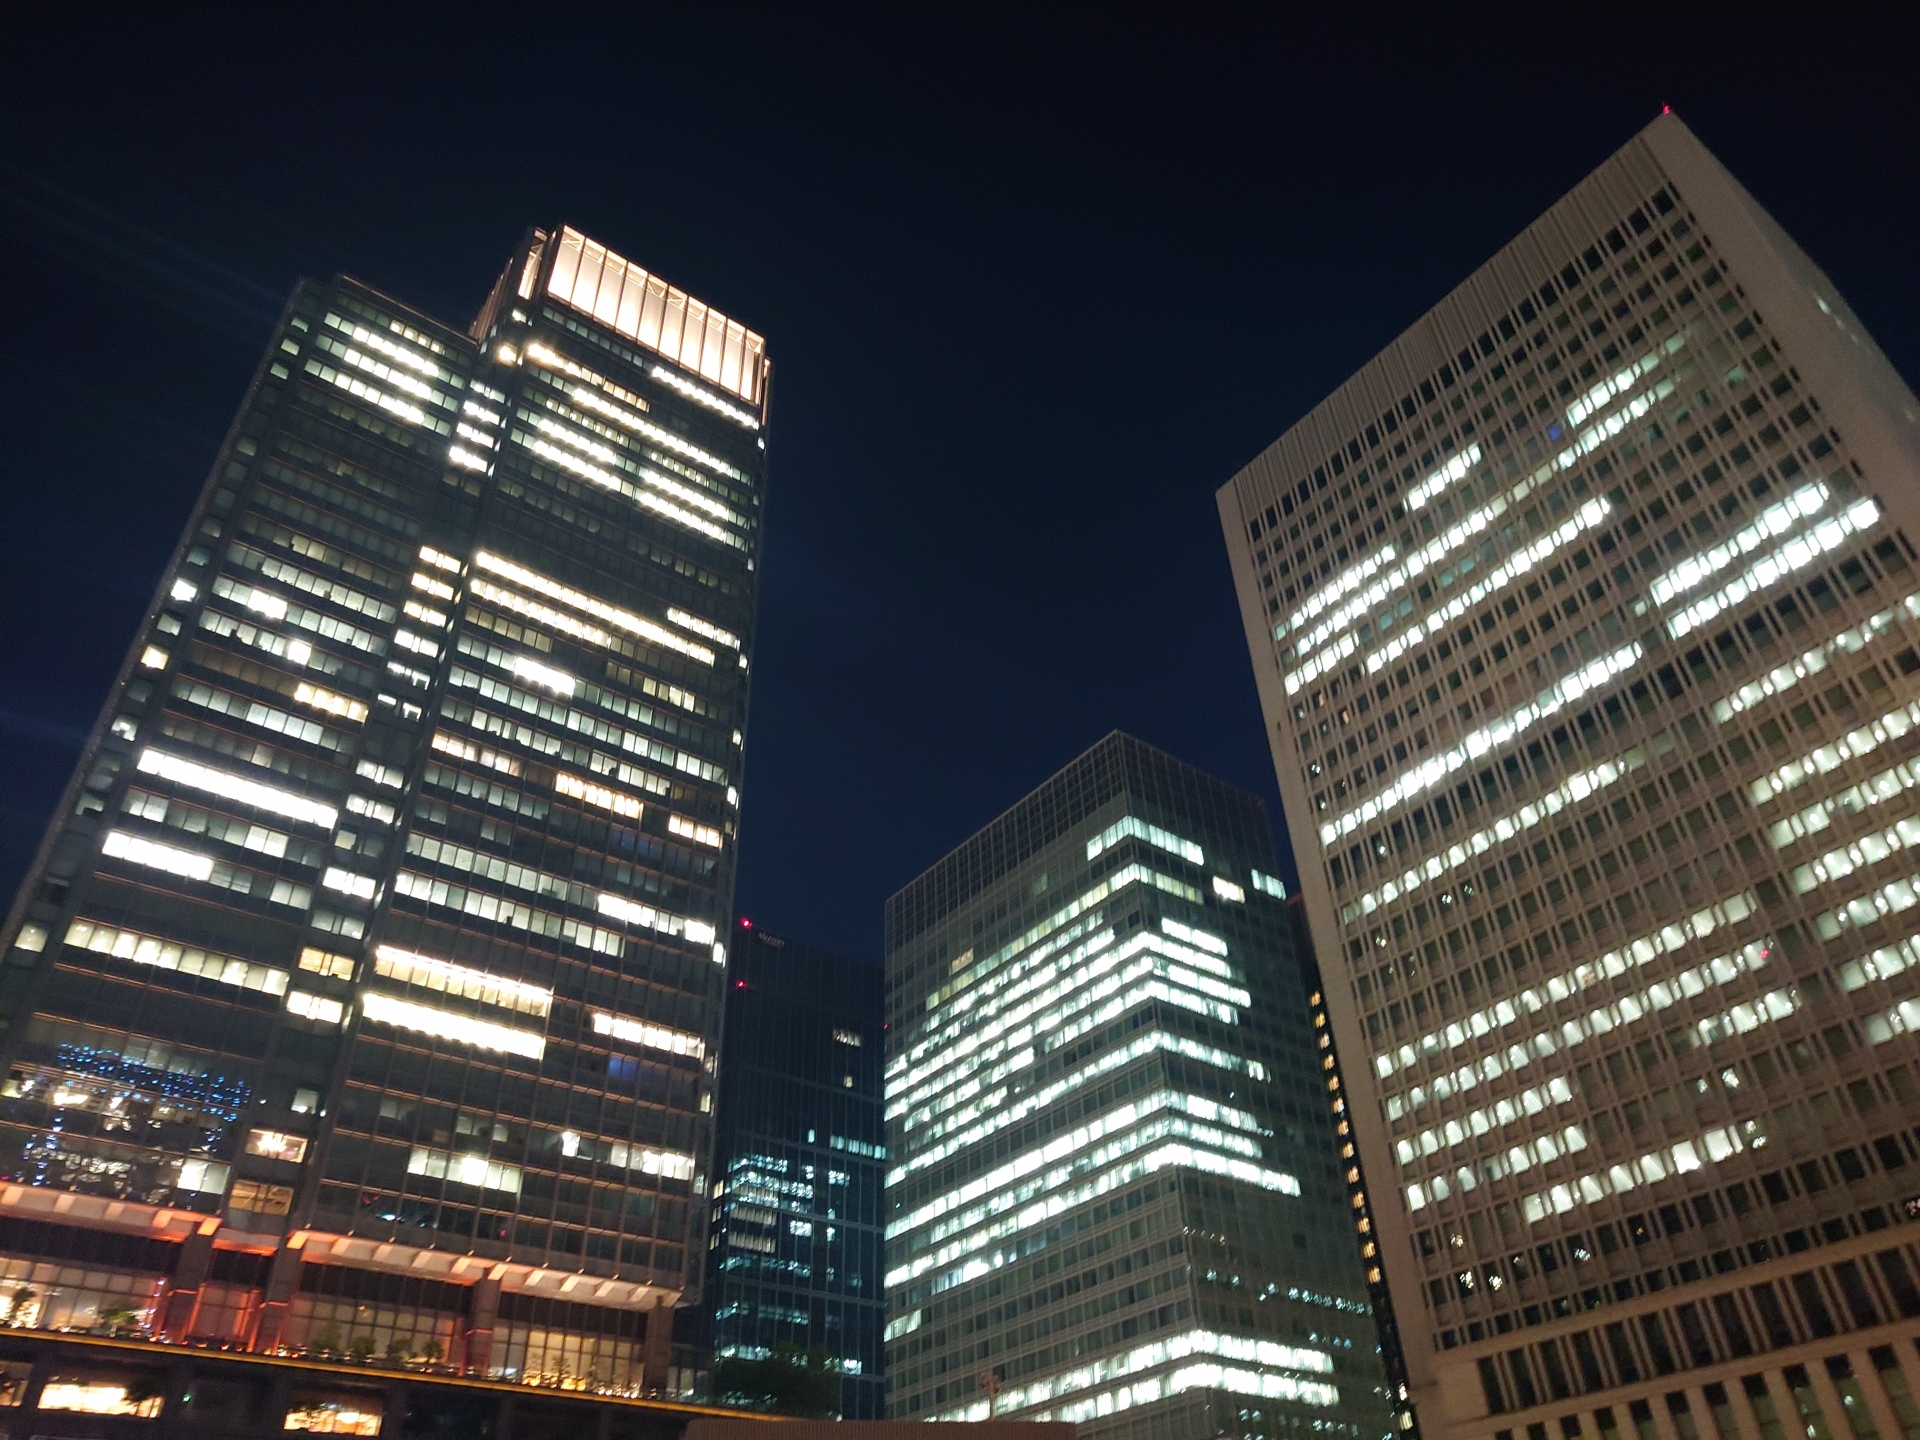 Office buildings somewhere in Tokyo at night, emitting light from their windows